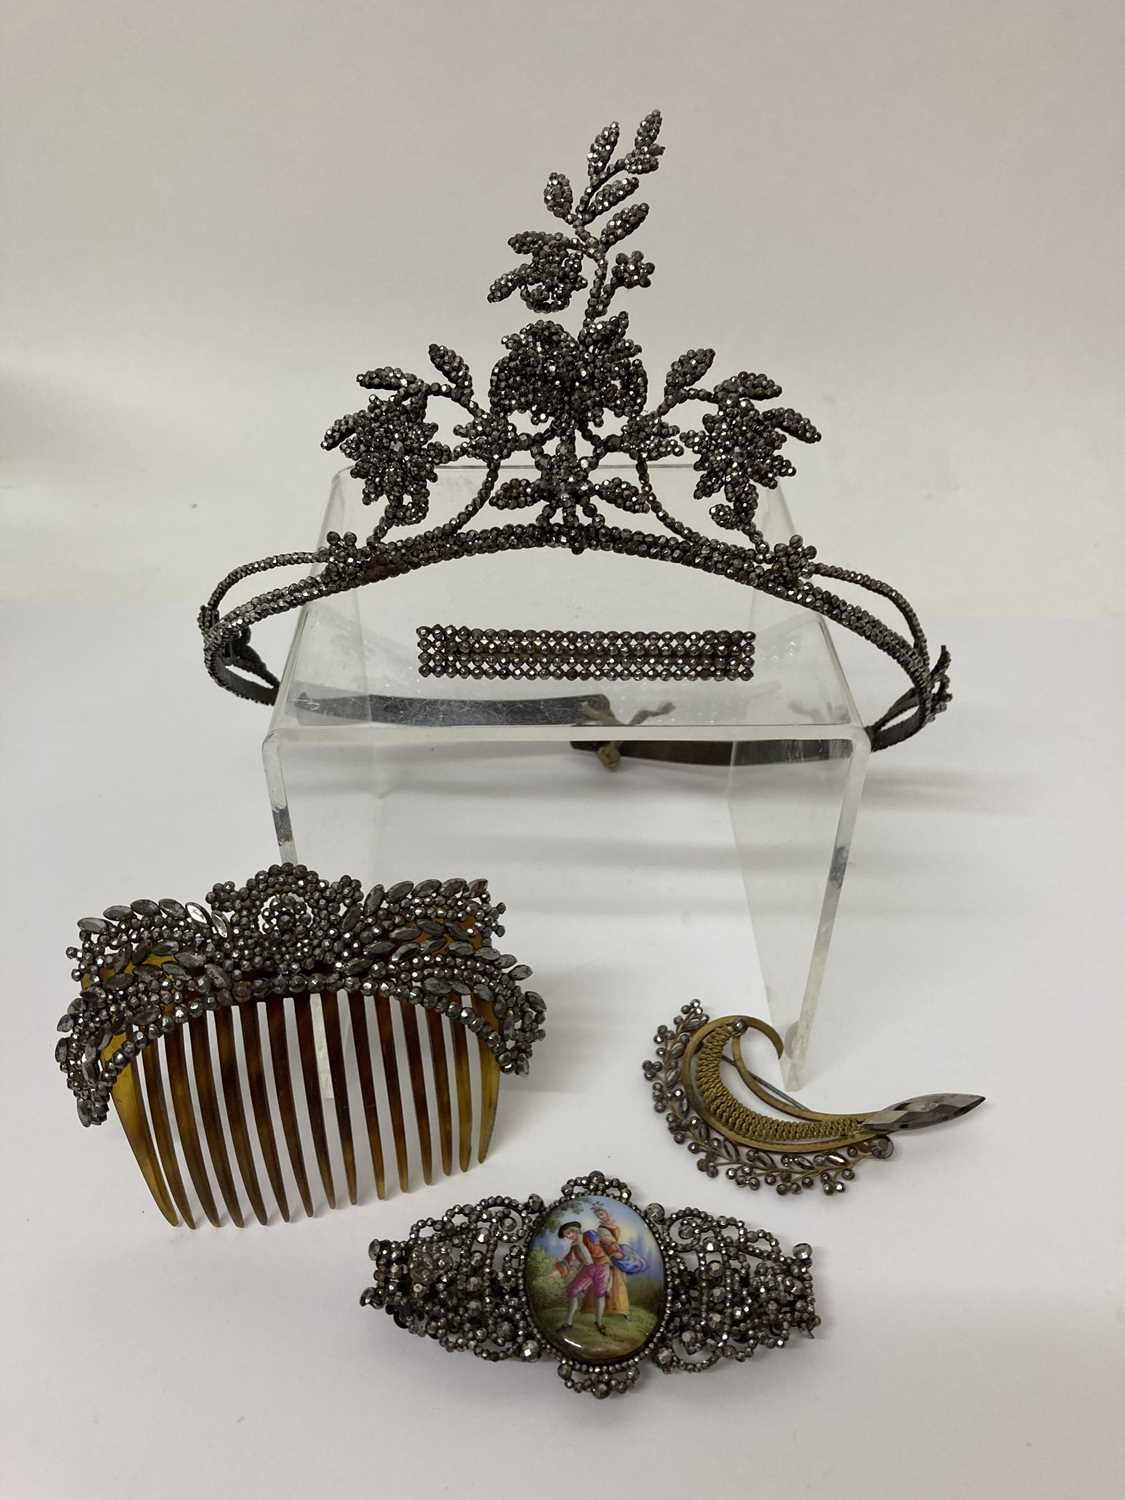 19th Century and Later Cut Steel Jewellery, comprising a decorative tiara with rotating flower heads